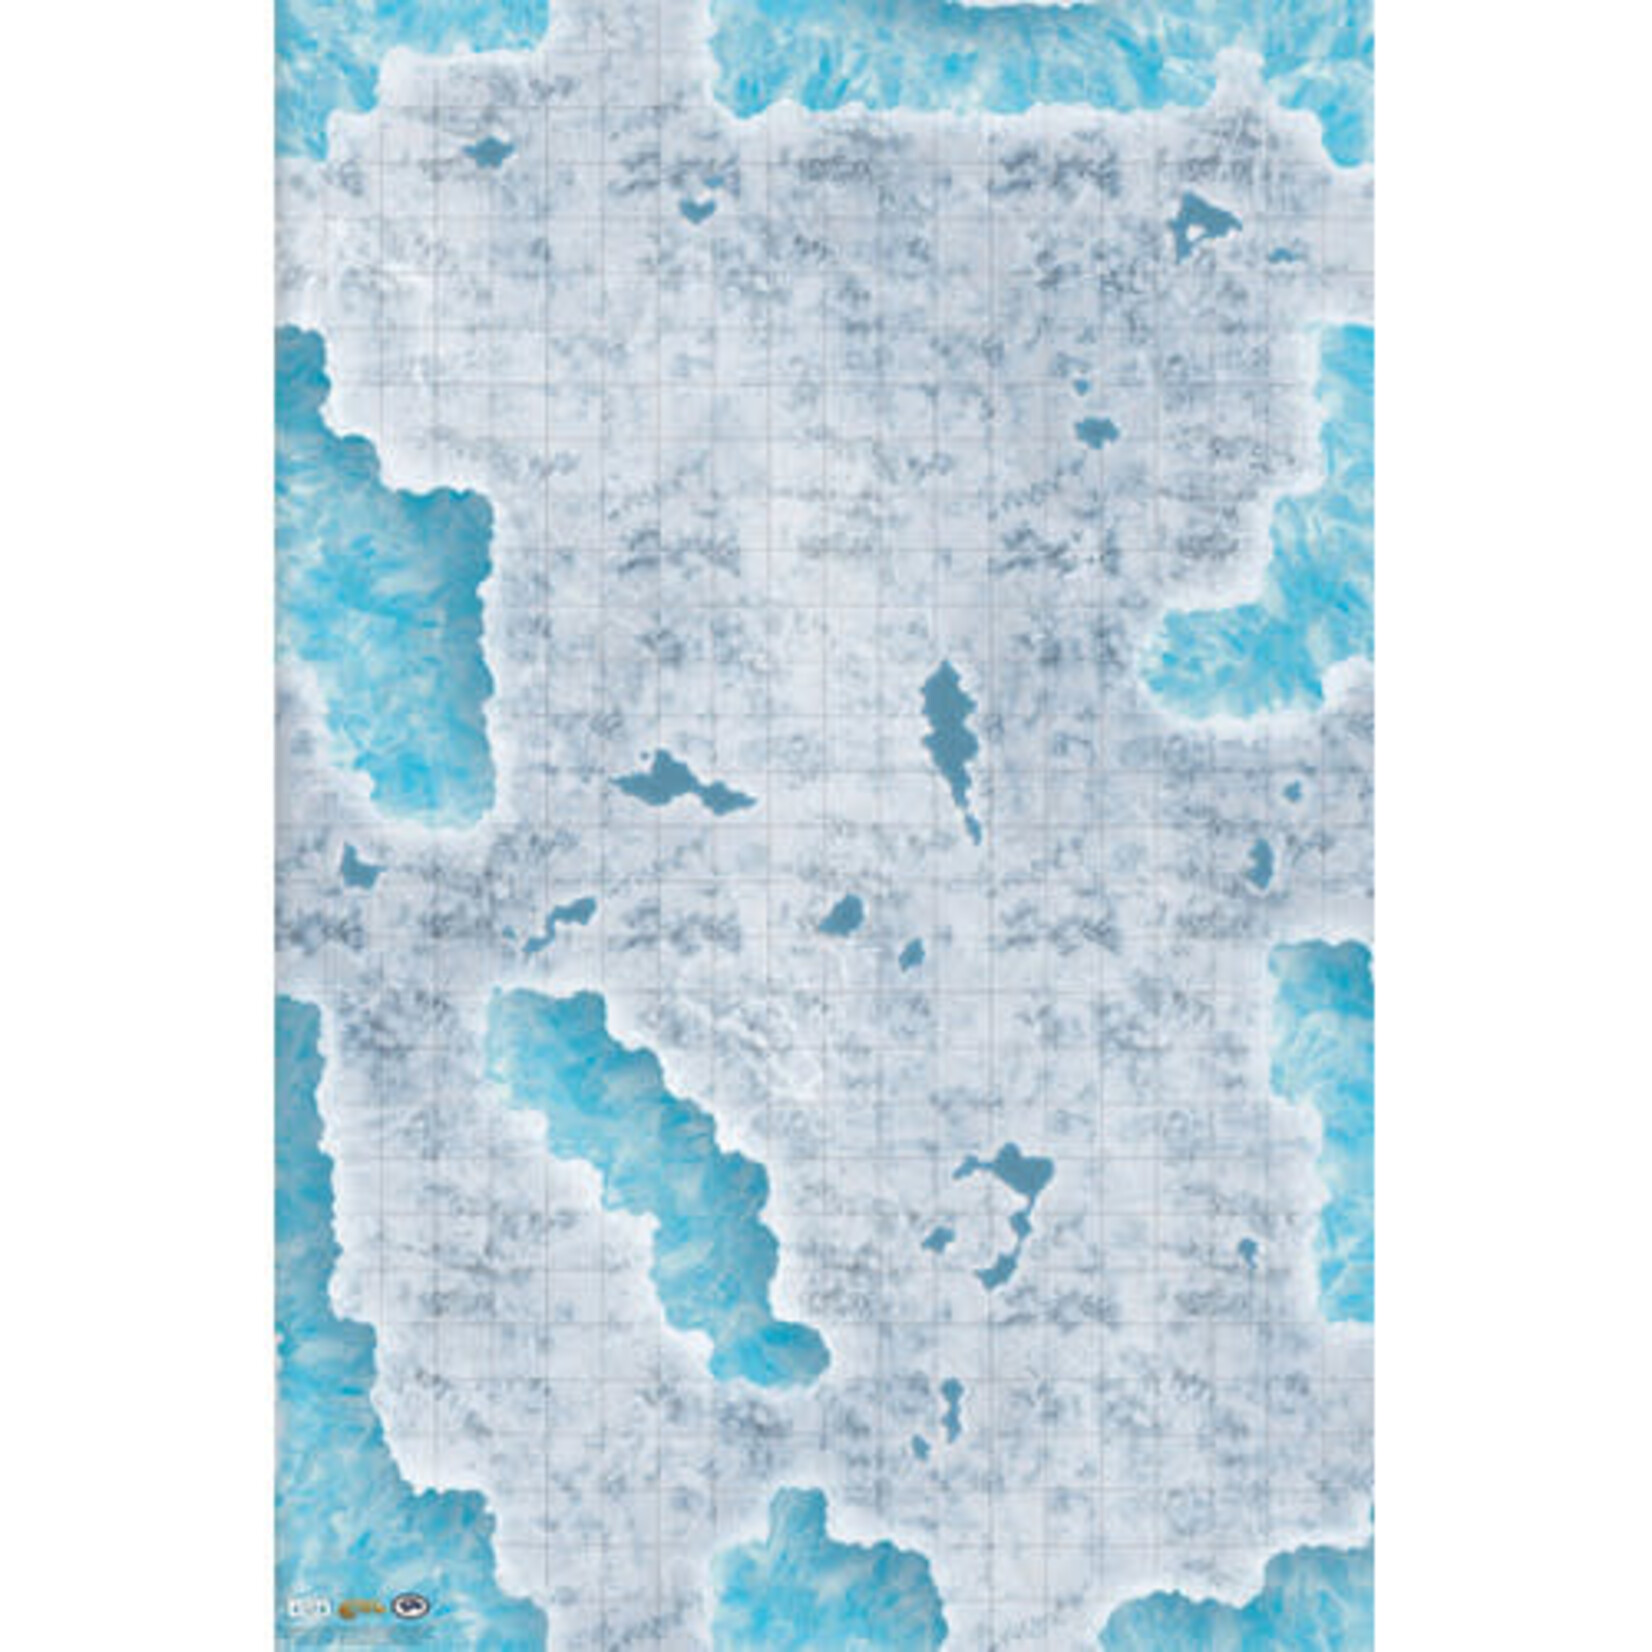 Gale Force 9 Caverns of Ice Encounter Map (30in x 20in)